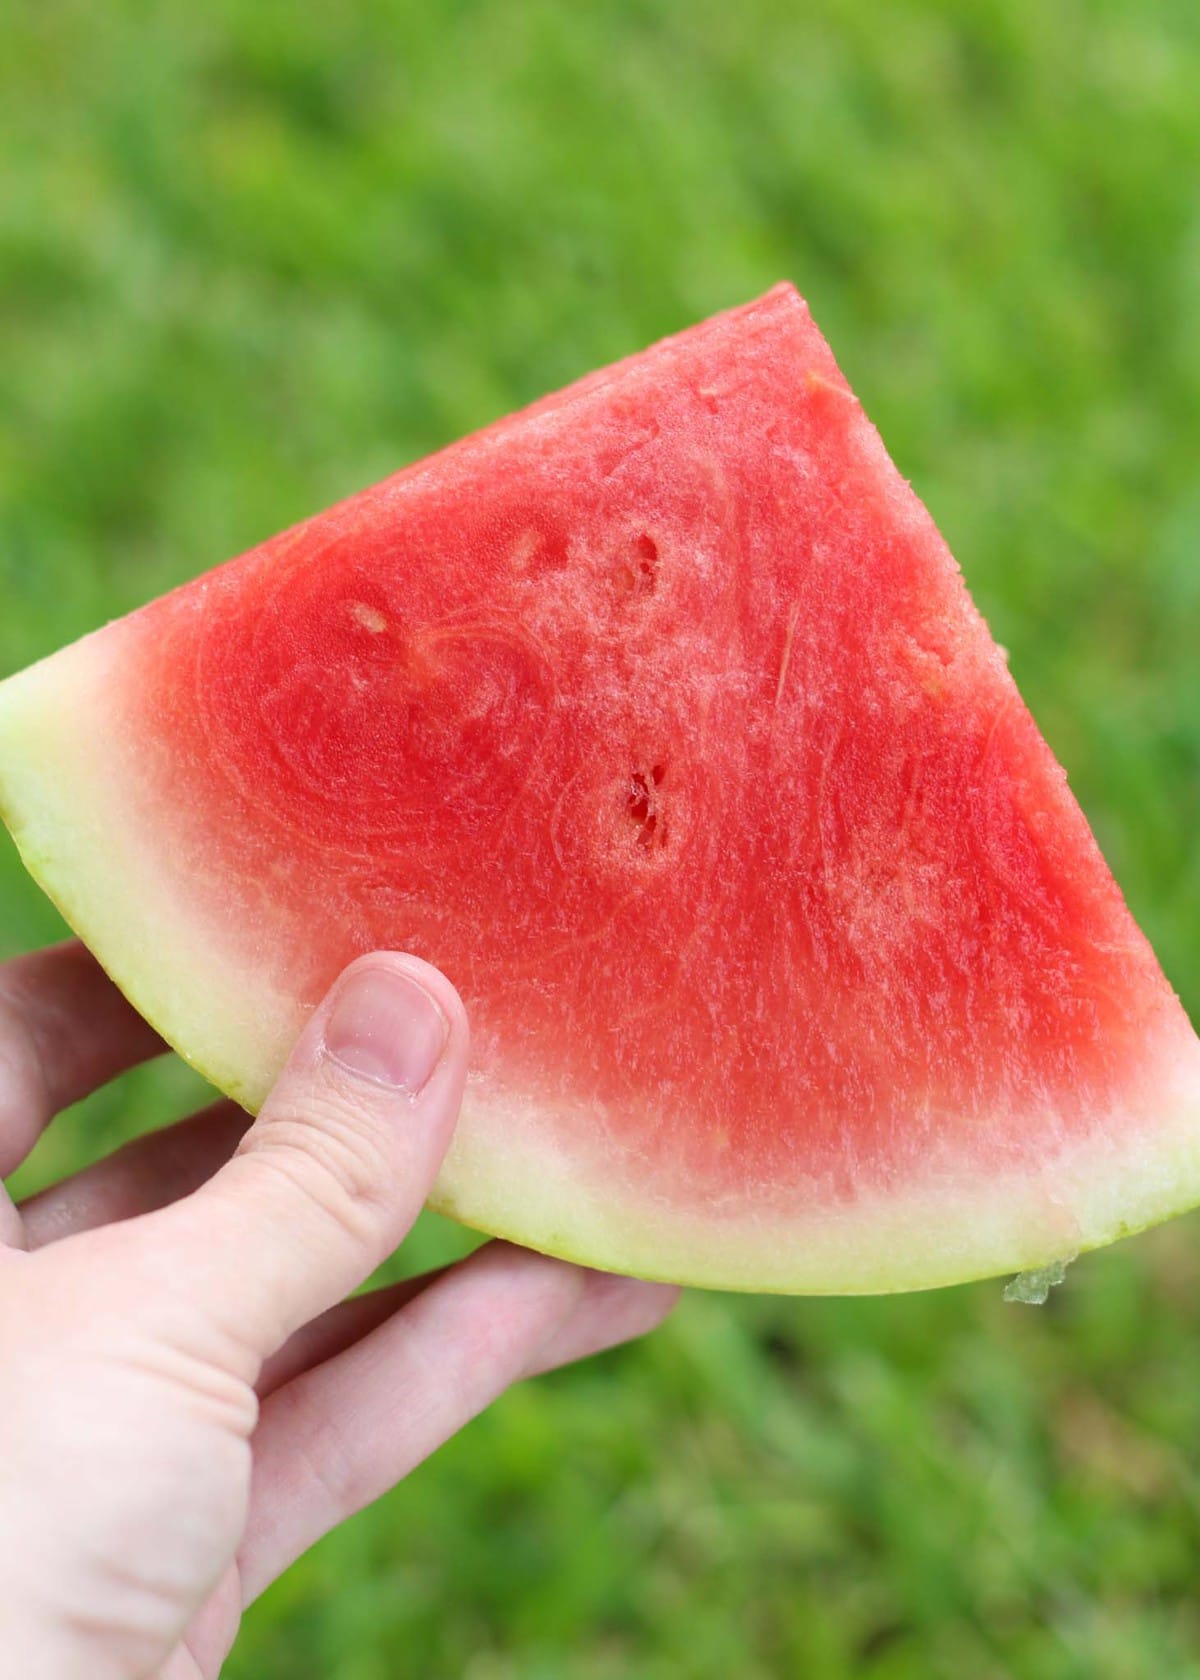 a ripe and juicy slice of perfectly picked watermelon